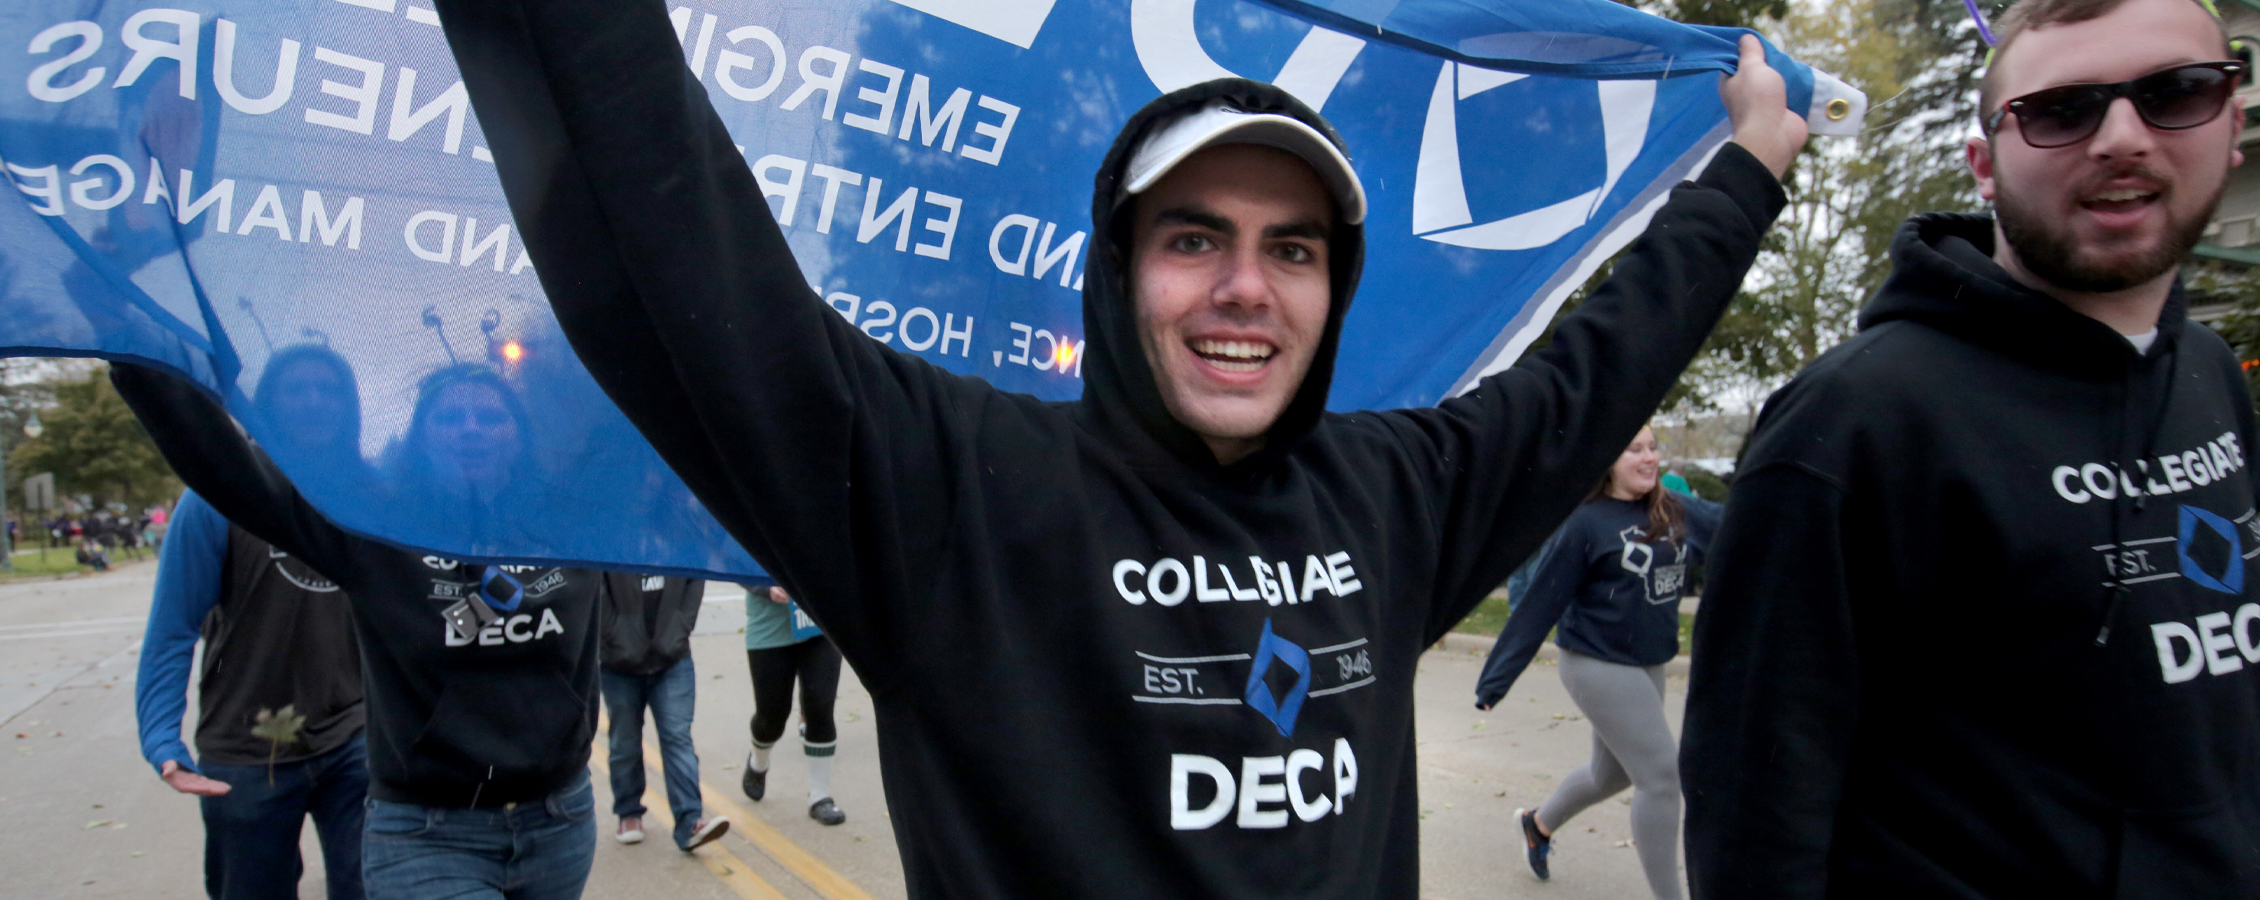 A student wears a DECA shirt and waves a DECA flag.